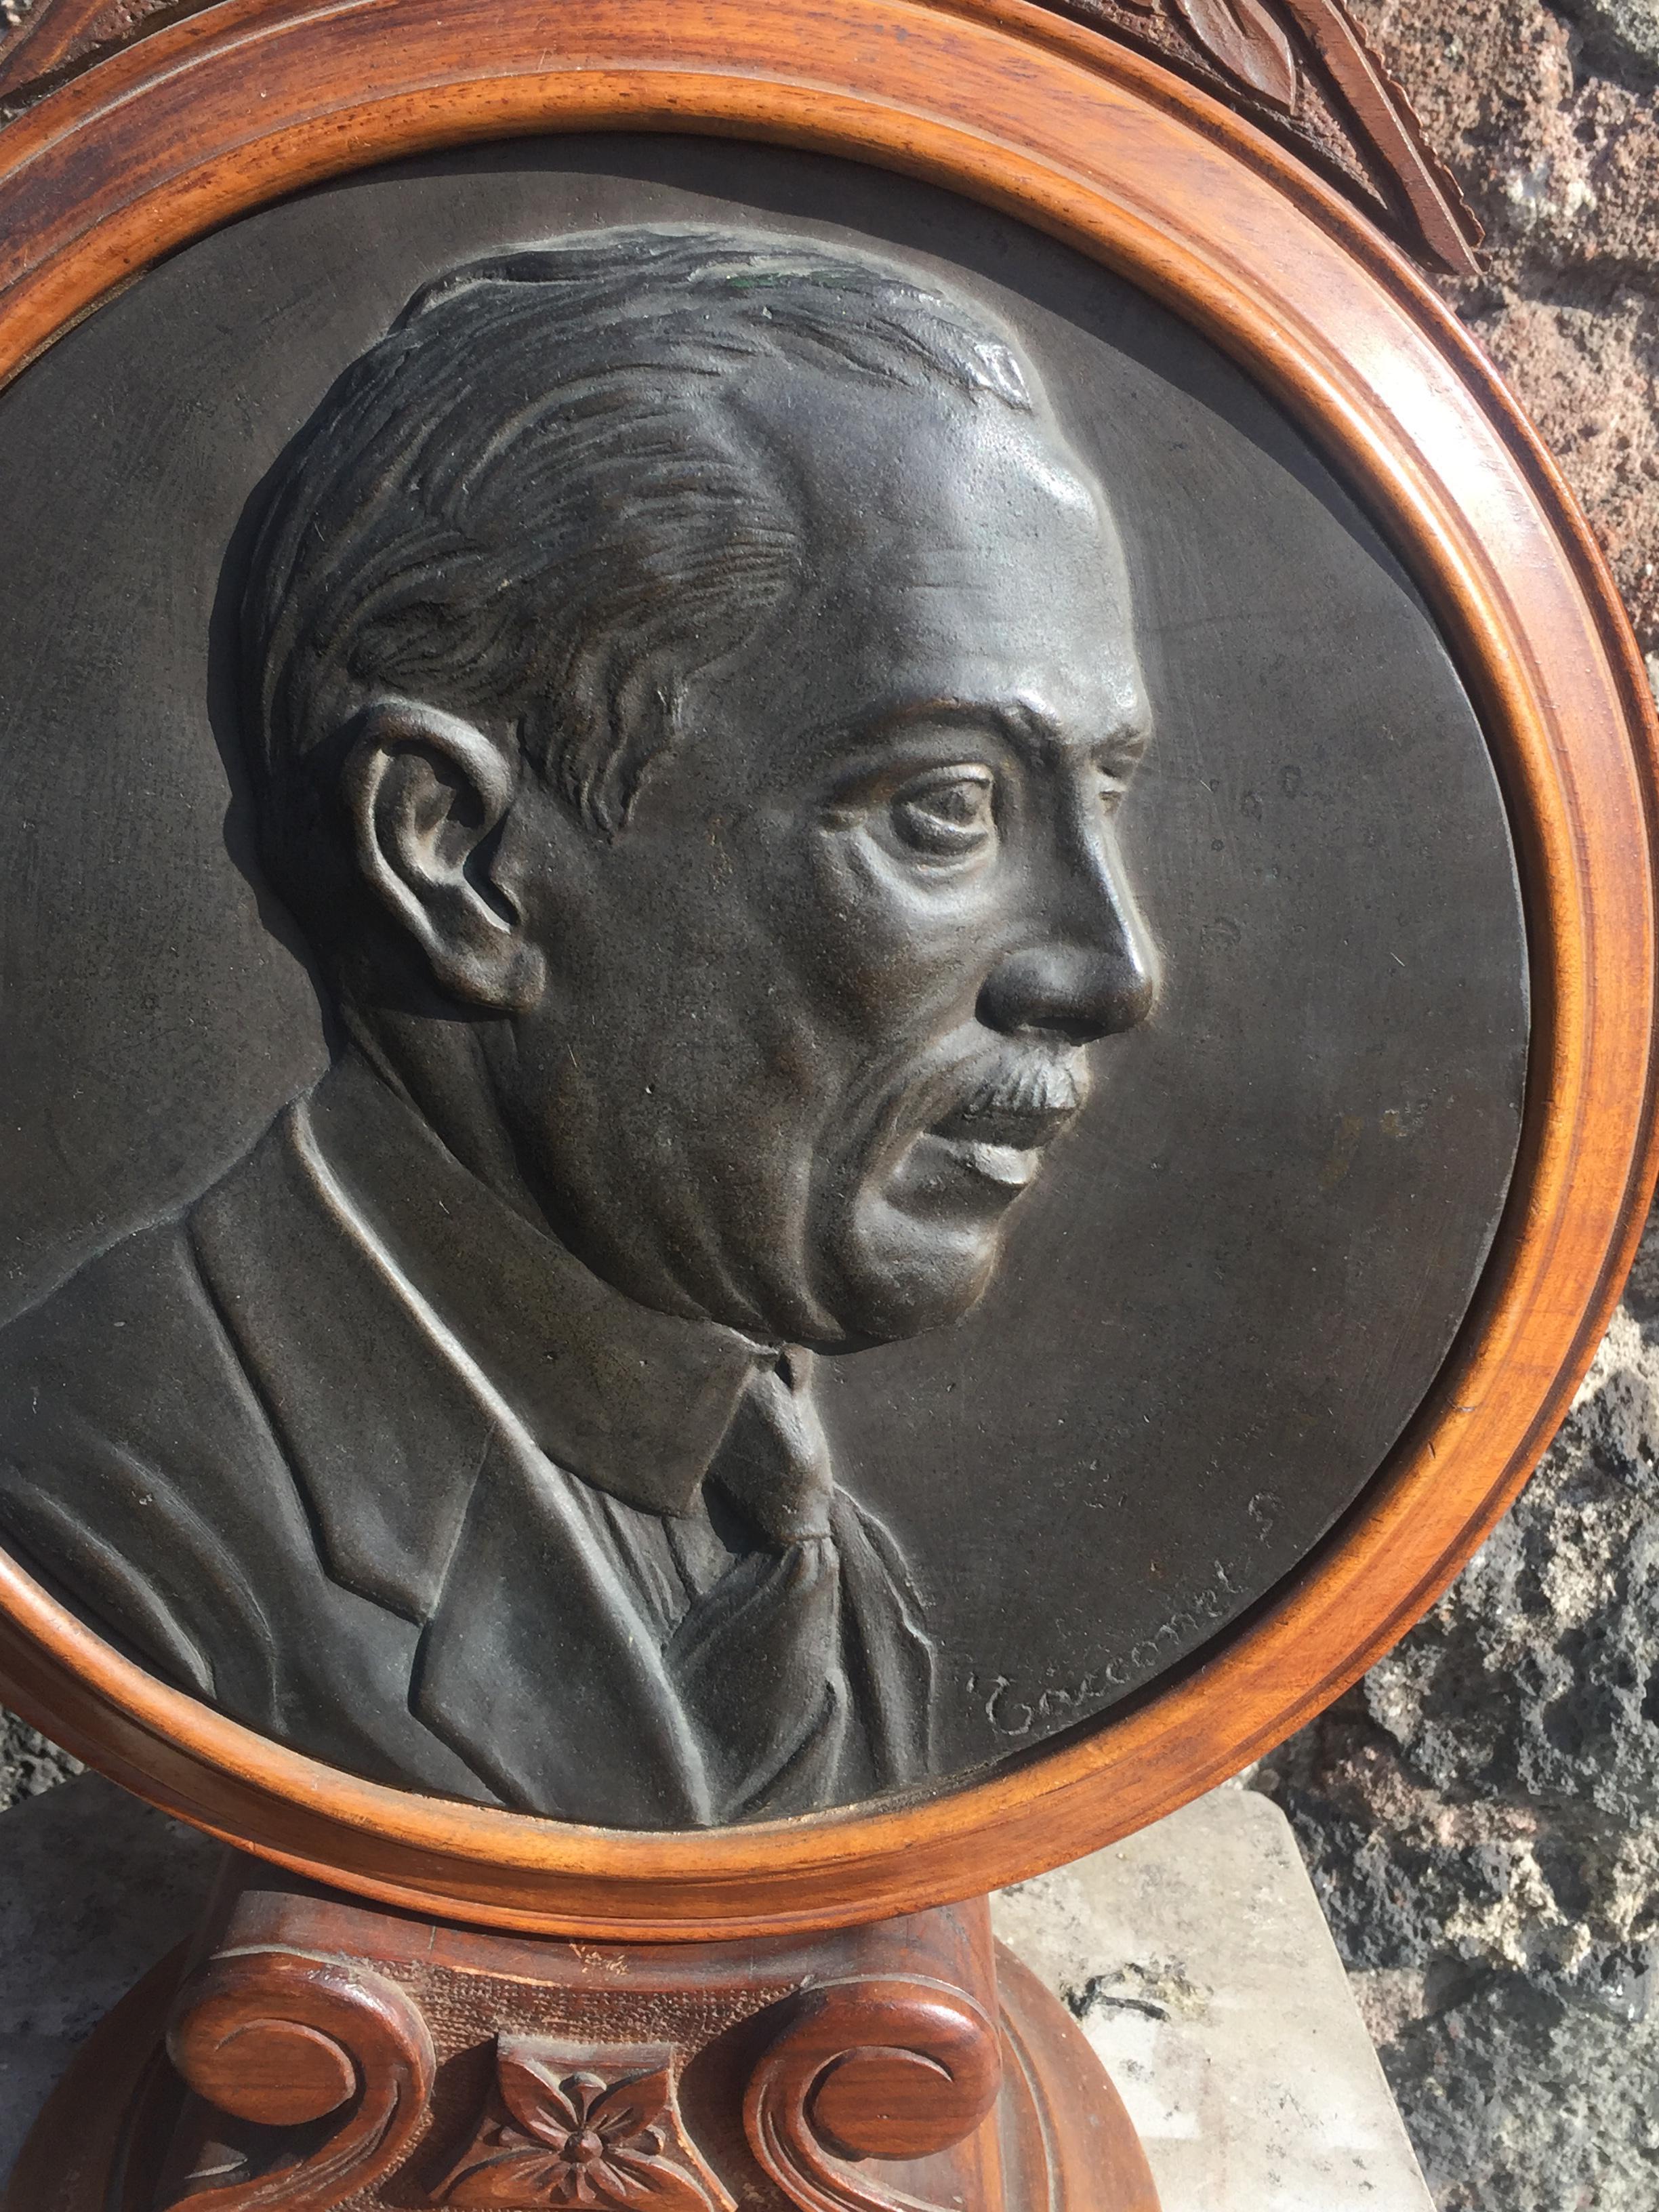 Round Bronze Plaque Depicting A Male Profile On A Wooden Support From The 1900s. Particular and signed object. Not easy to find, as it was commissioned by the portrait subject.